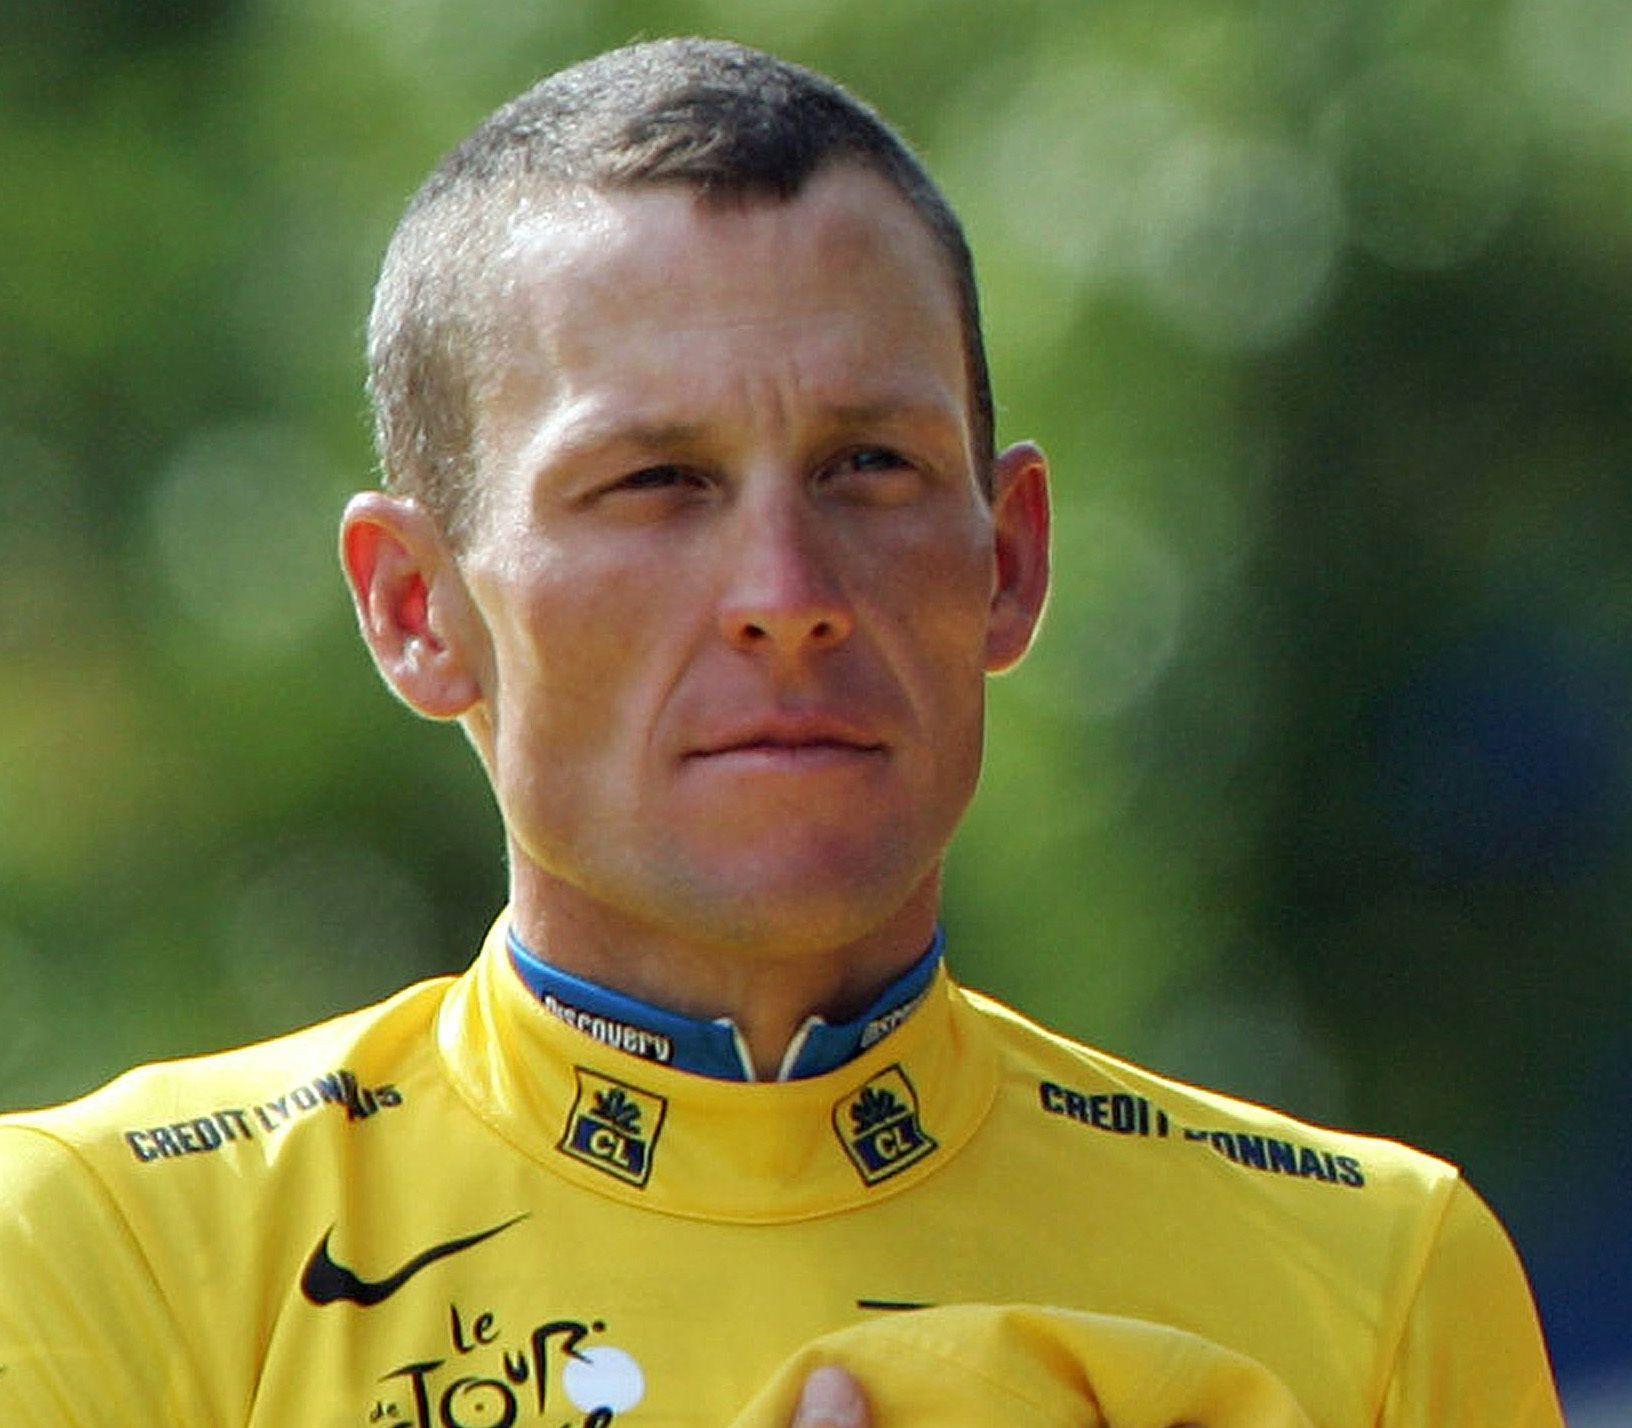 WTF ? Lance Armstrong Speaks of Honor. Links Life Golf